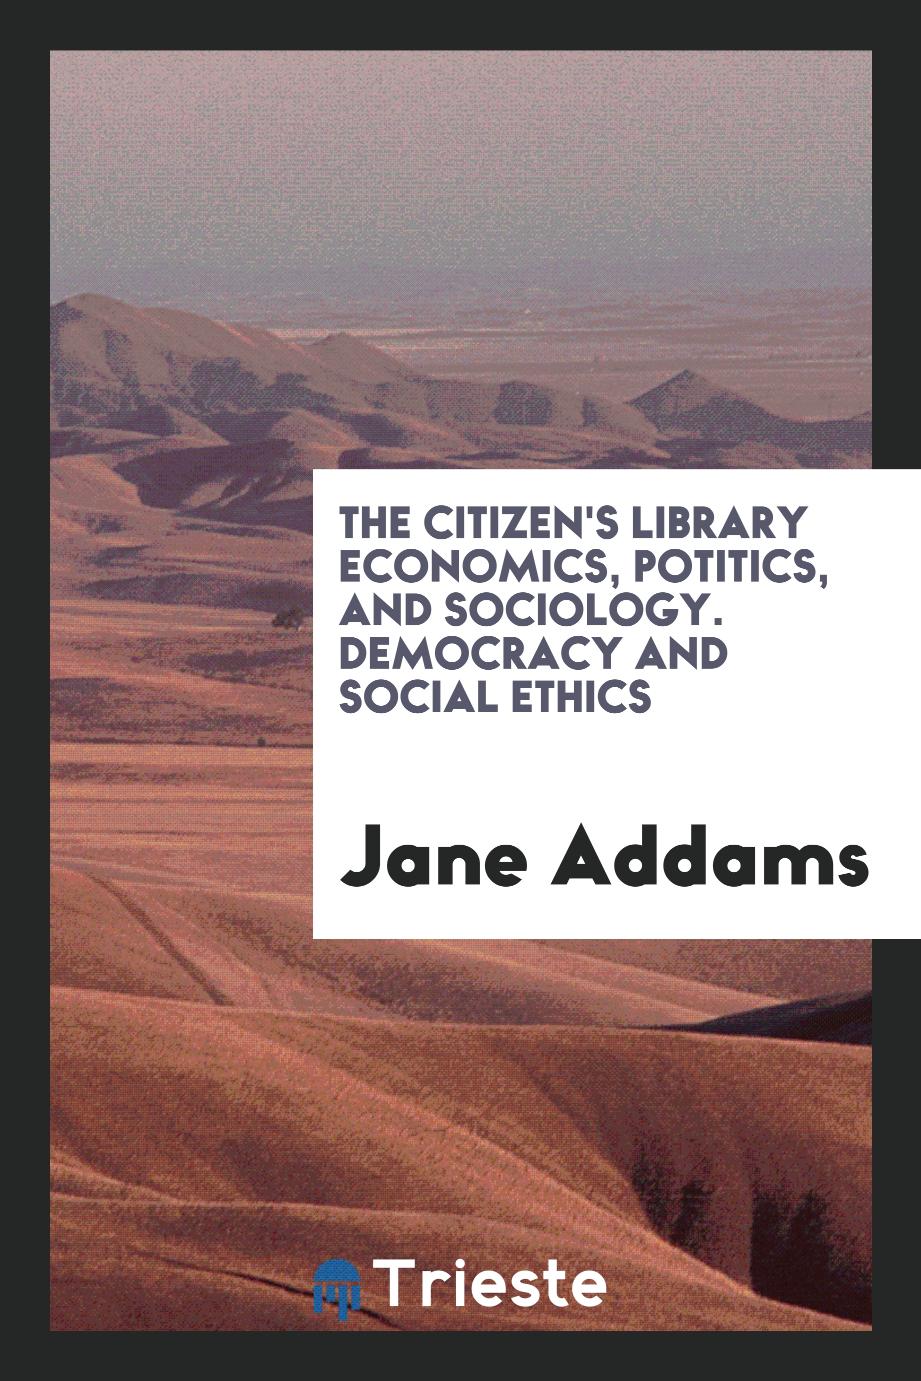 Jane Addams - The Citizen's Library Economics, Potitics, and Sociology. Democracy and Social Ethics